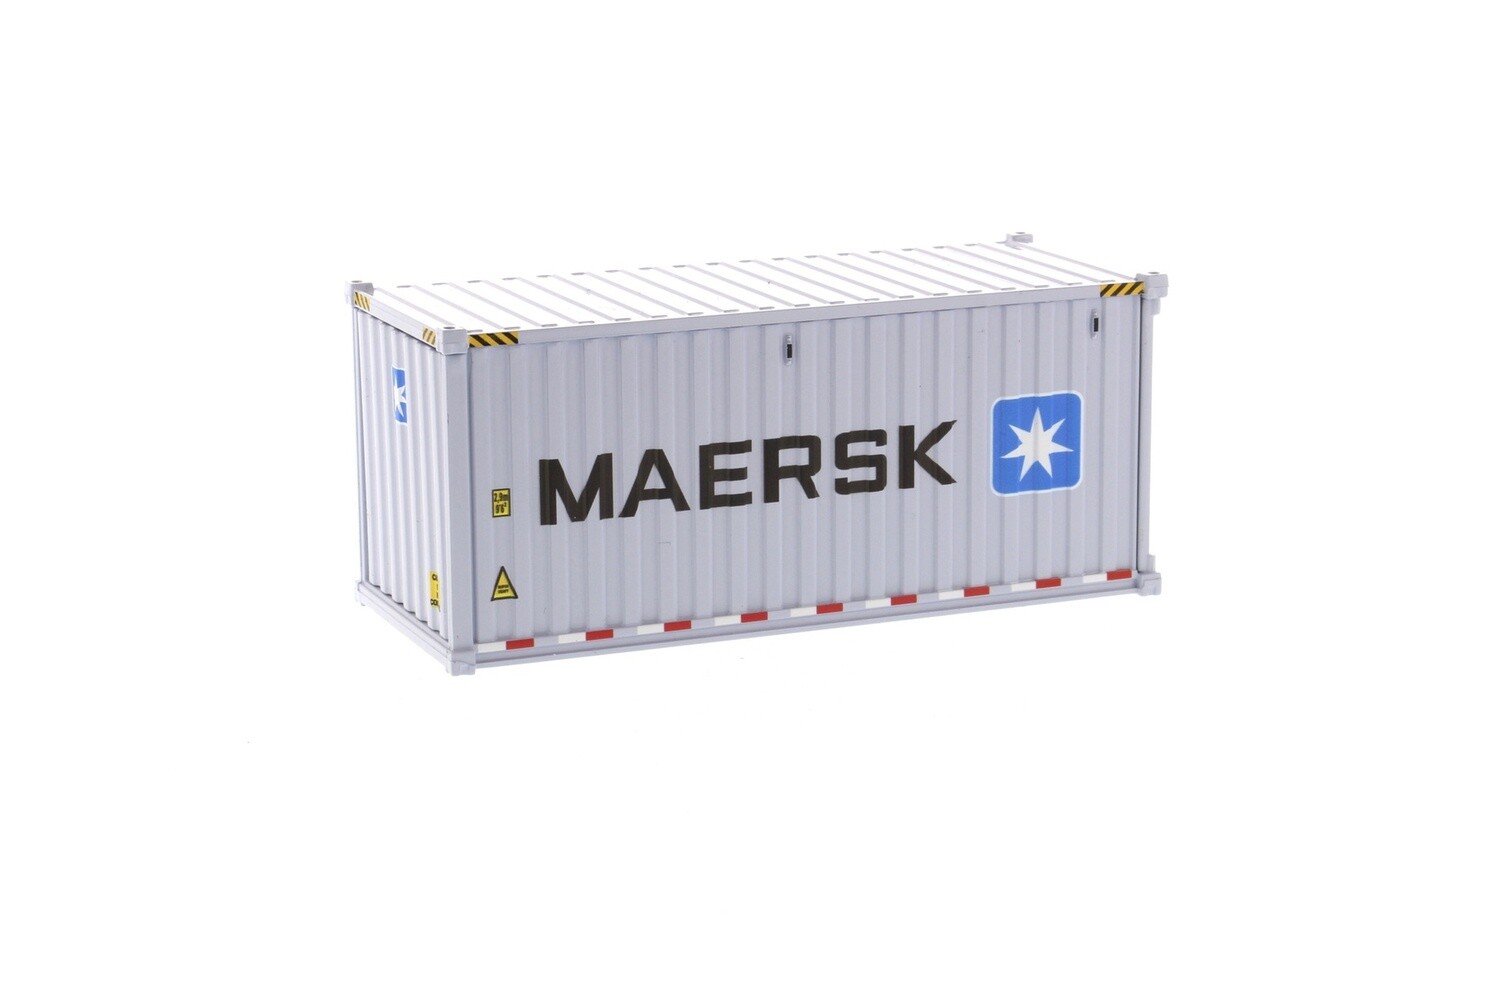 20' Dry Goods Sea Container - Maersk